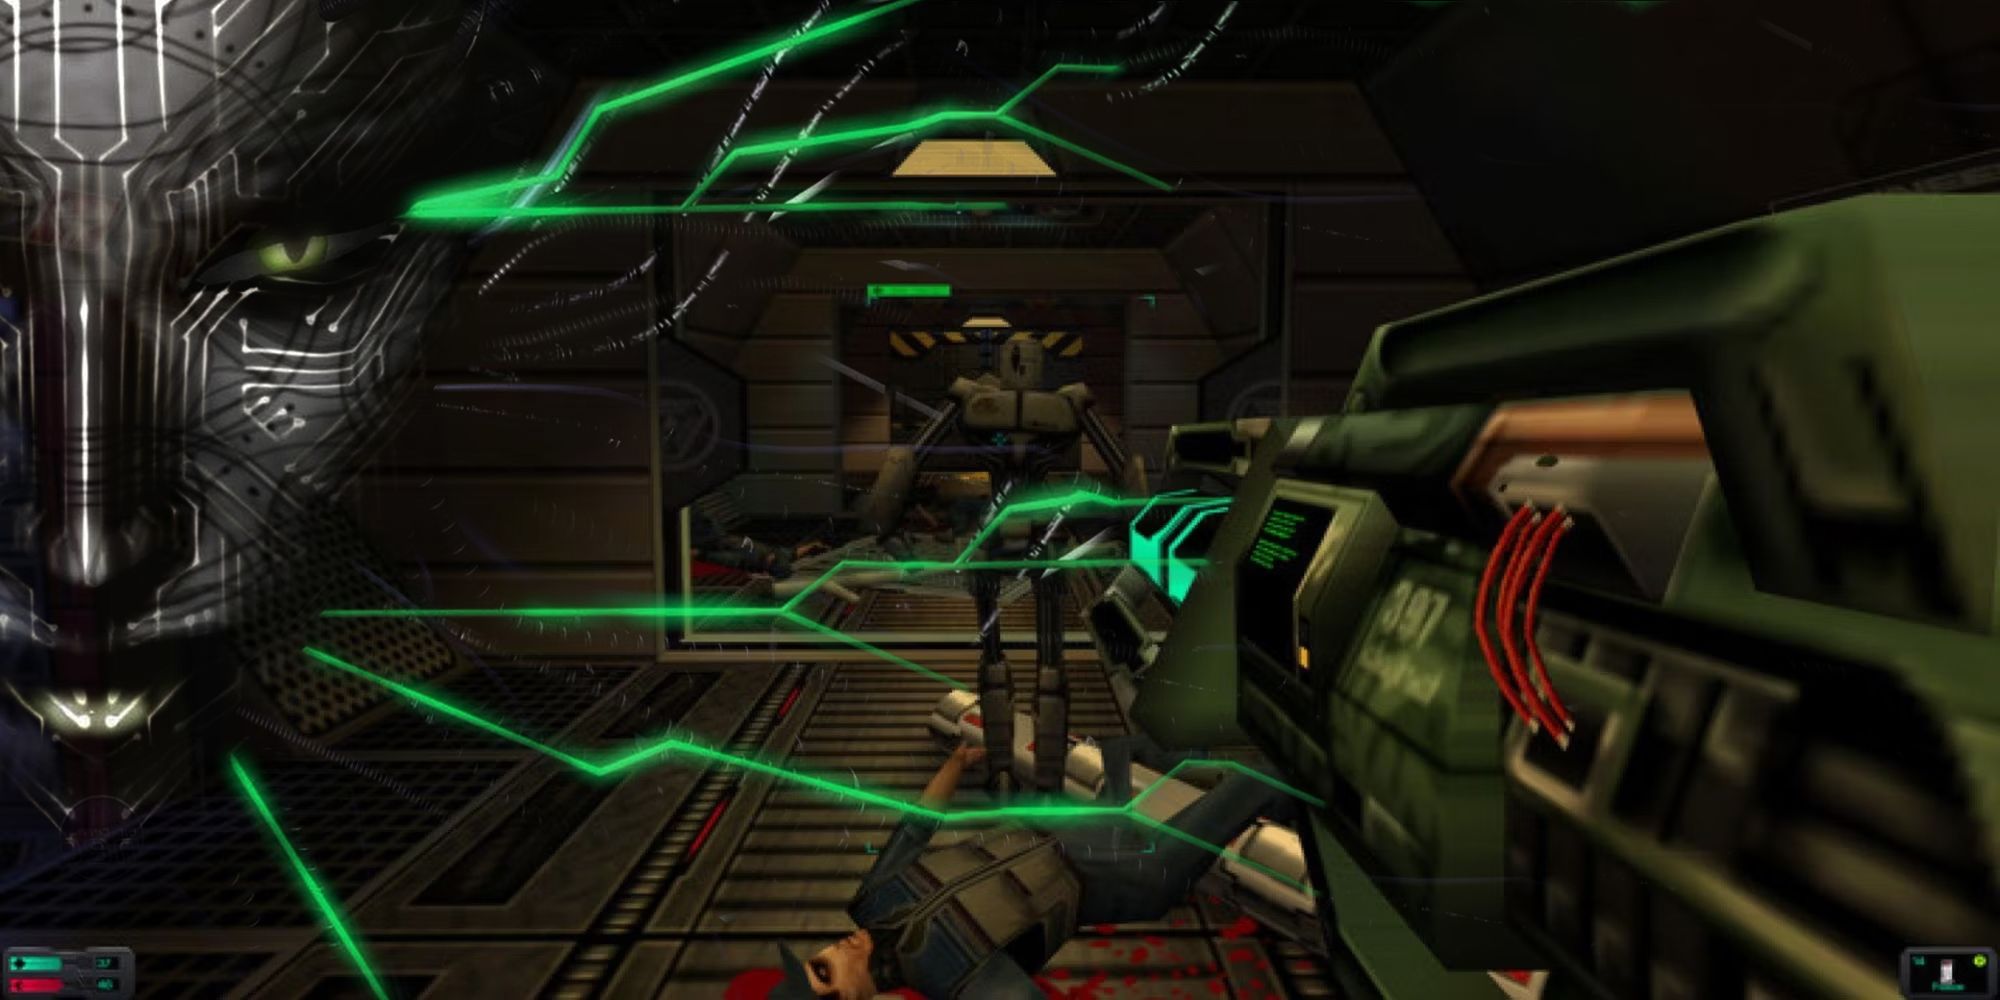 Aiming a weapon in System Shock 2